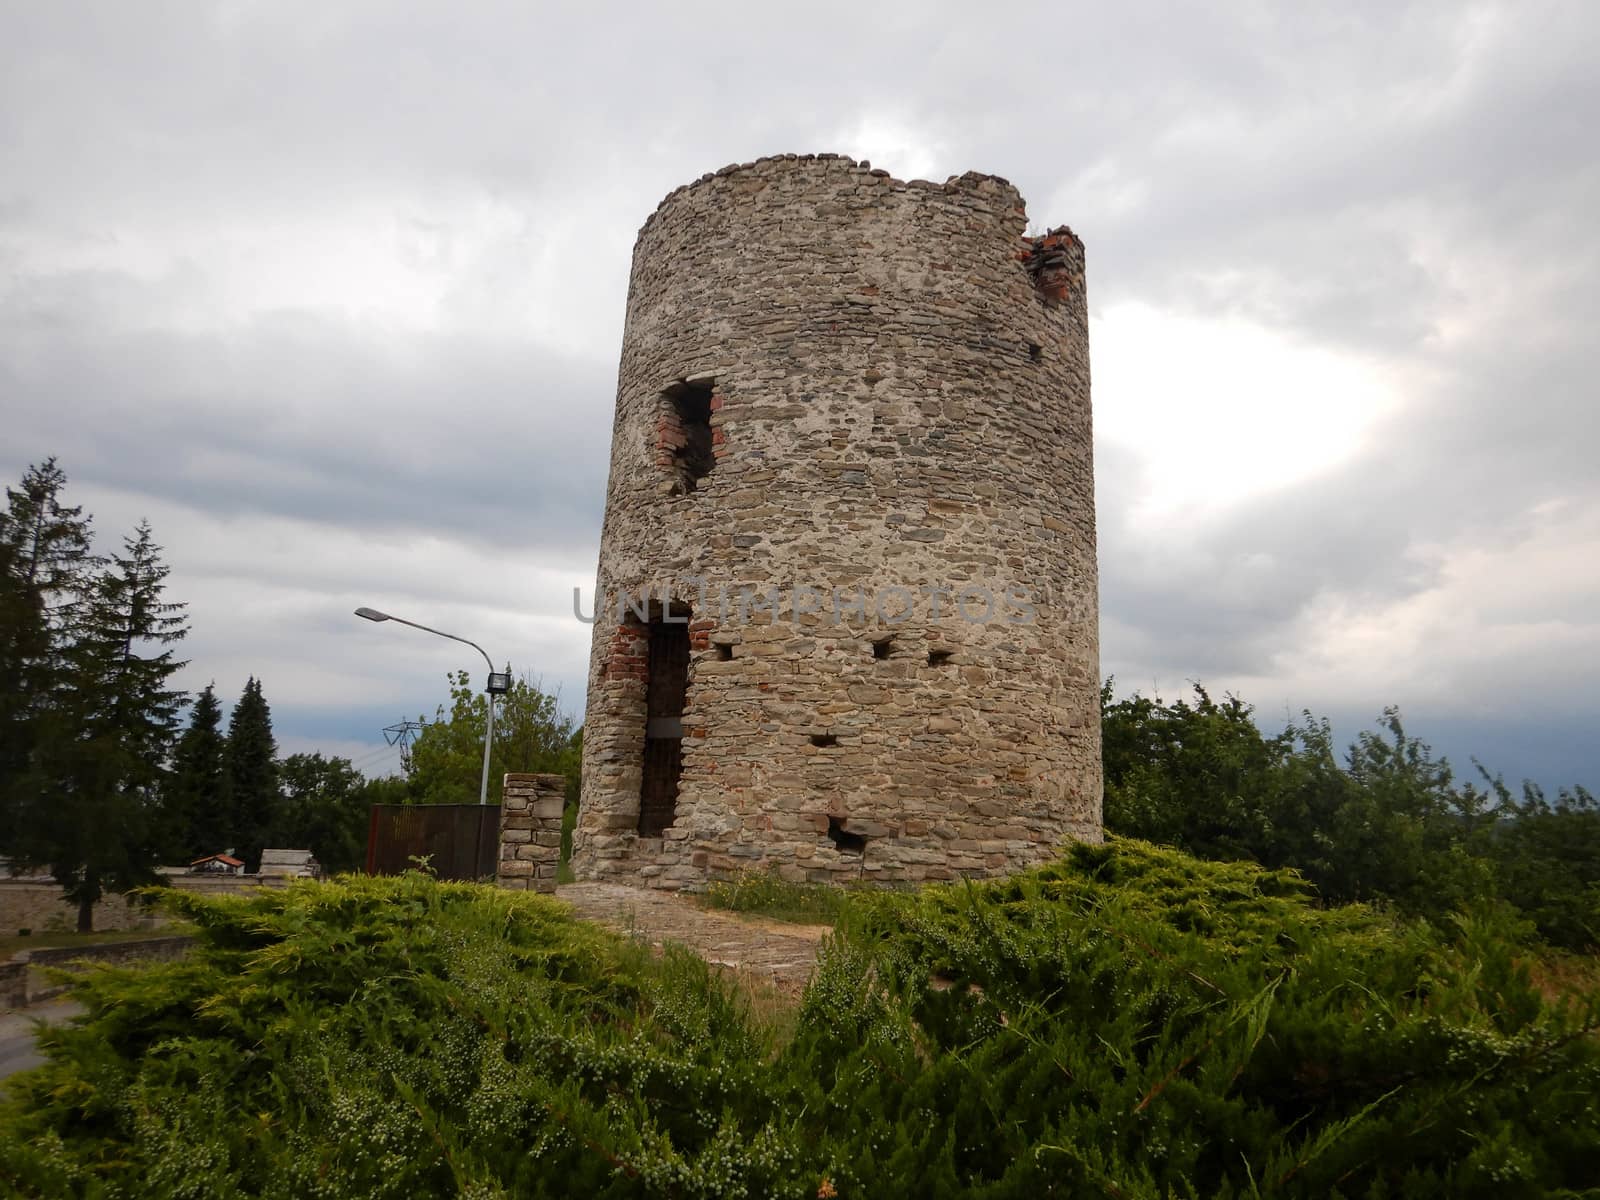 Ancient military tower later transformed into a mill in Murazzano, Piedmont - Italy